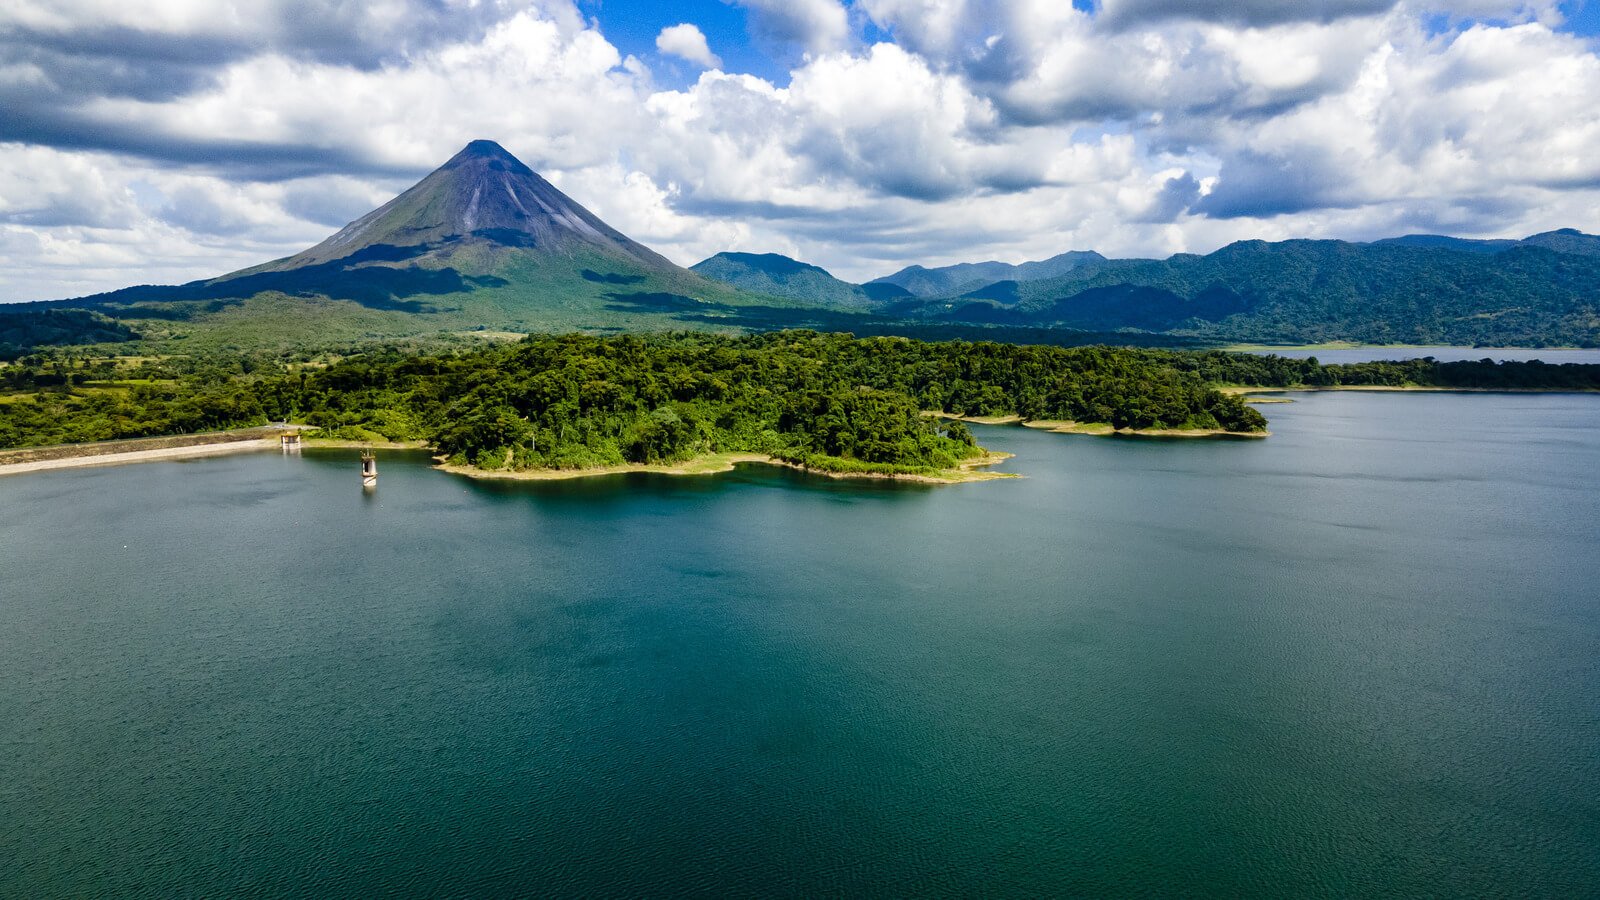 A panoramic image of Arenal volcano and the Costa Rica coastline